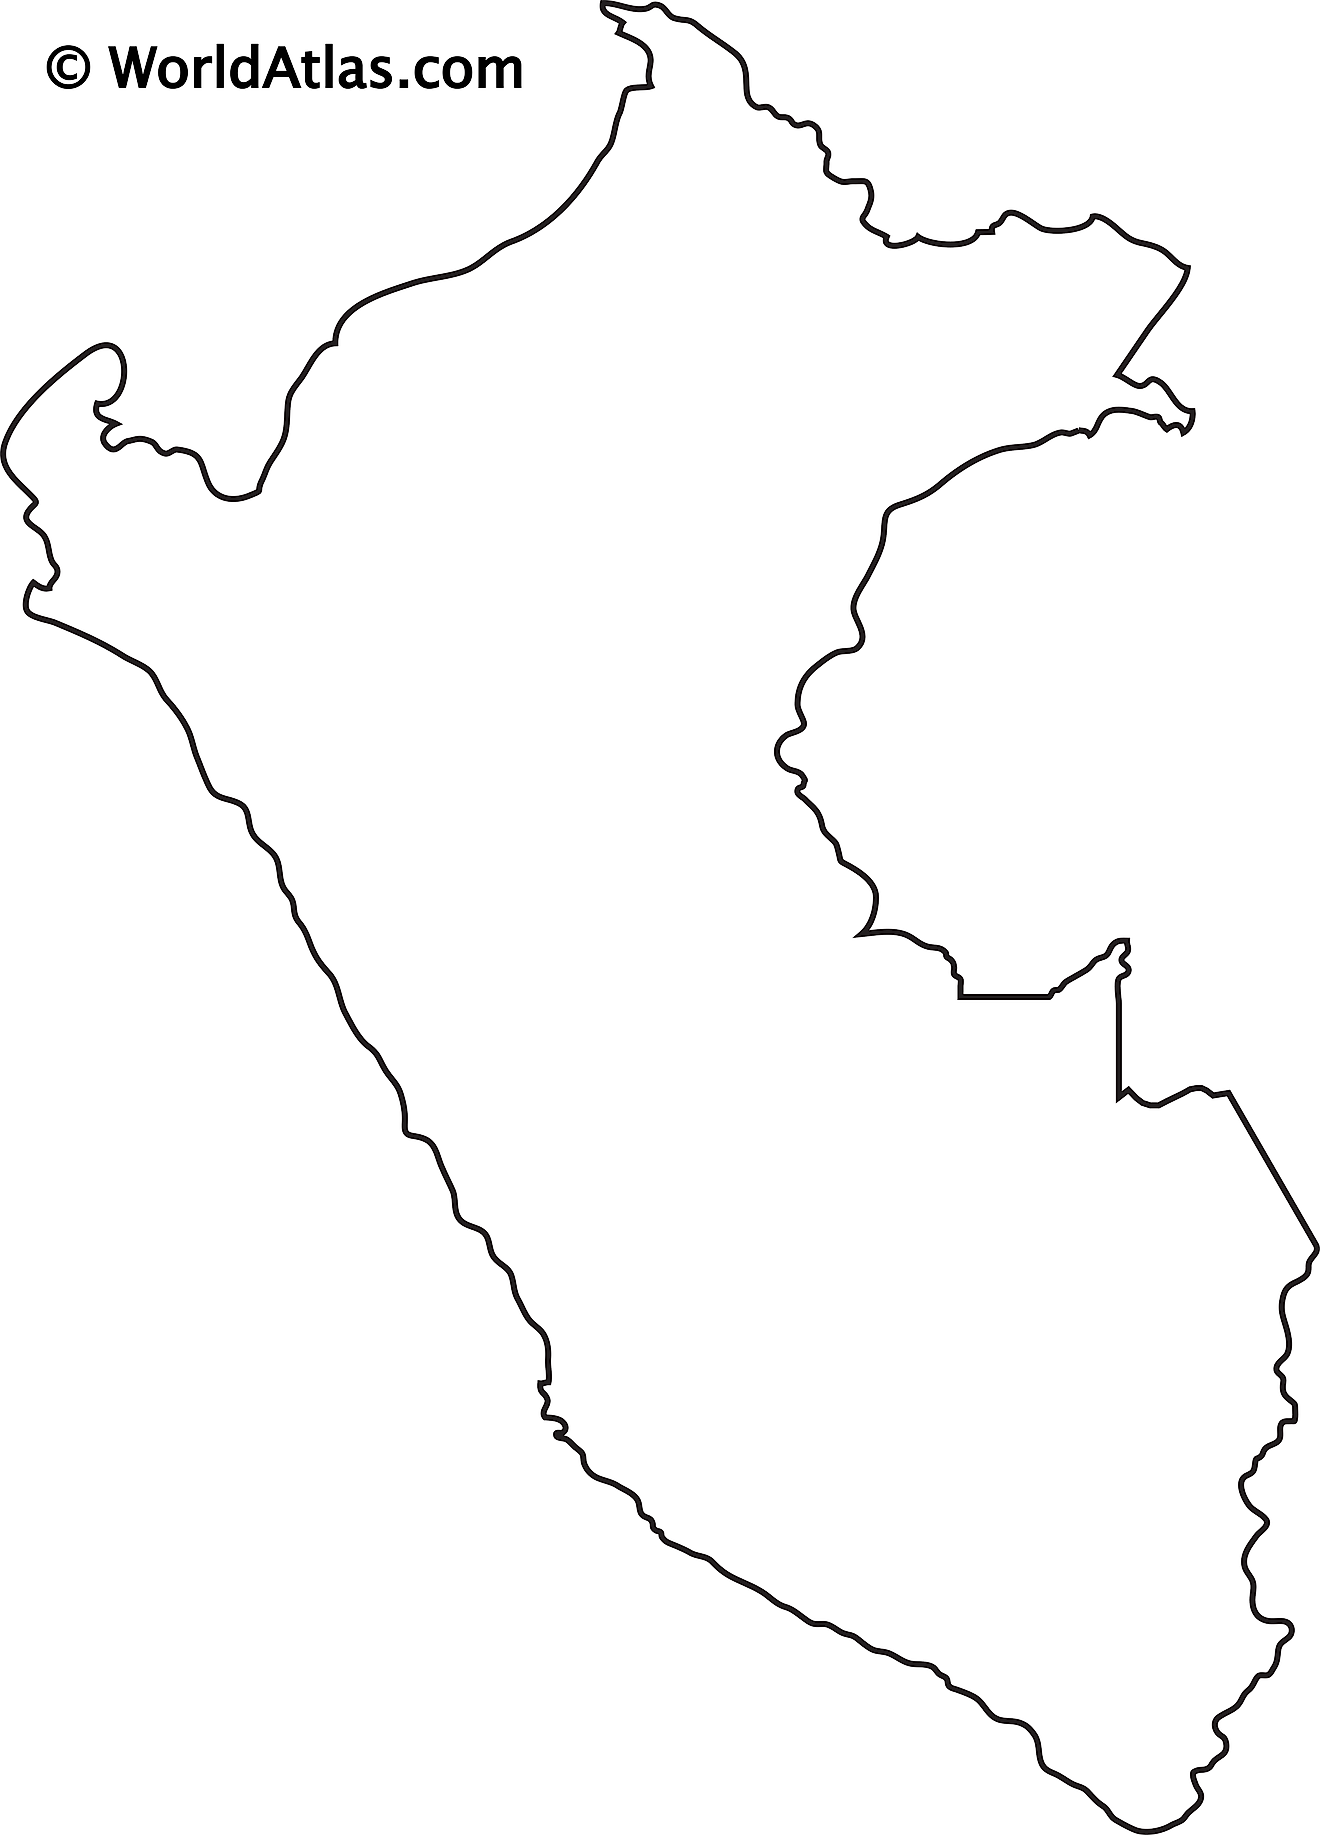 Blank Outline Map of Peru